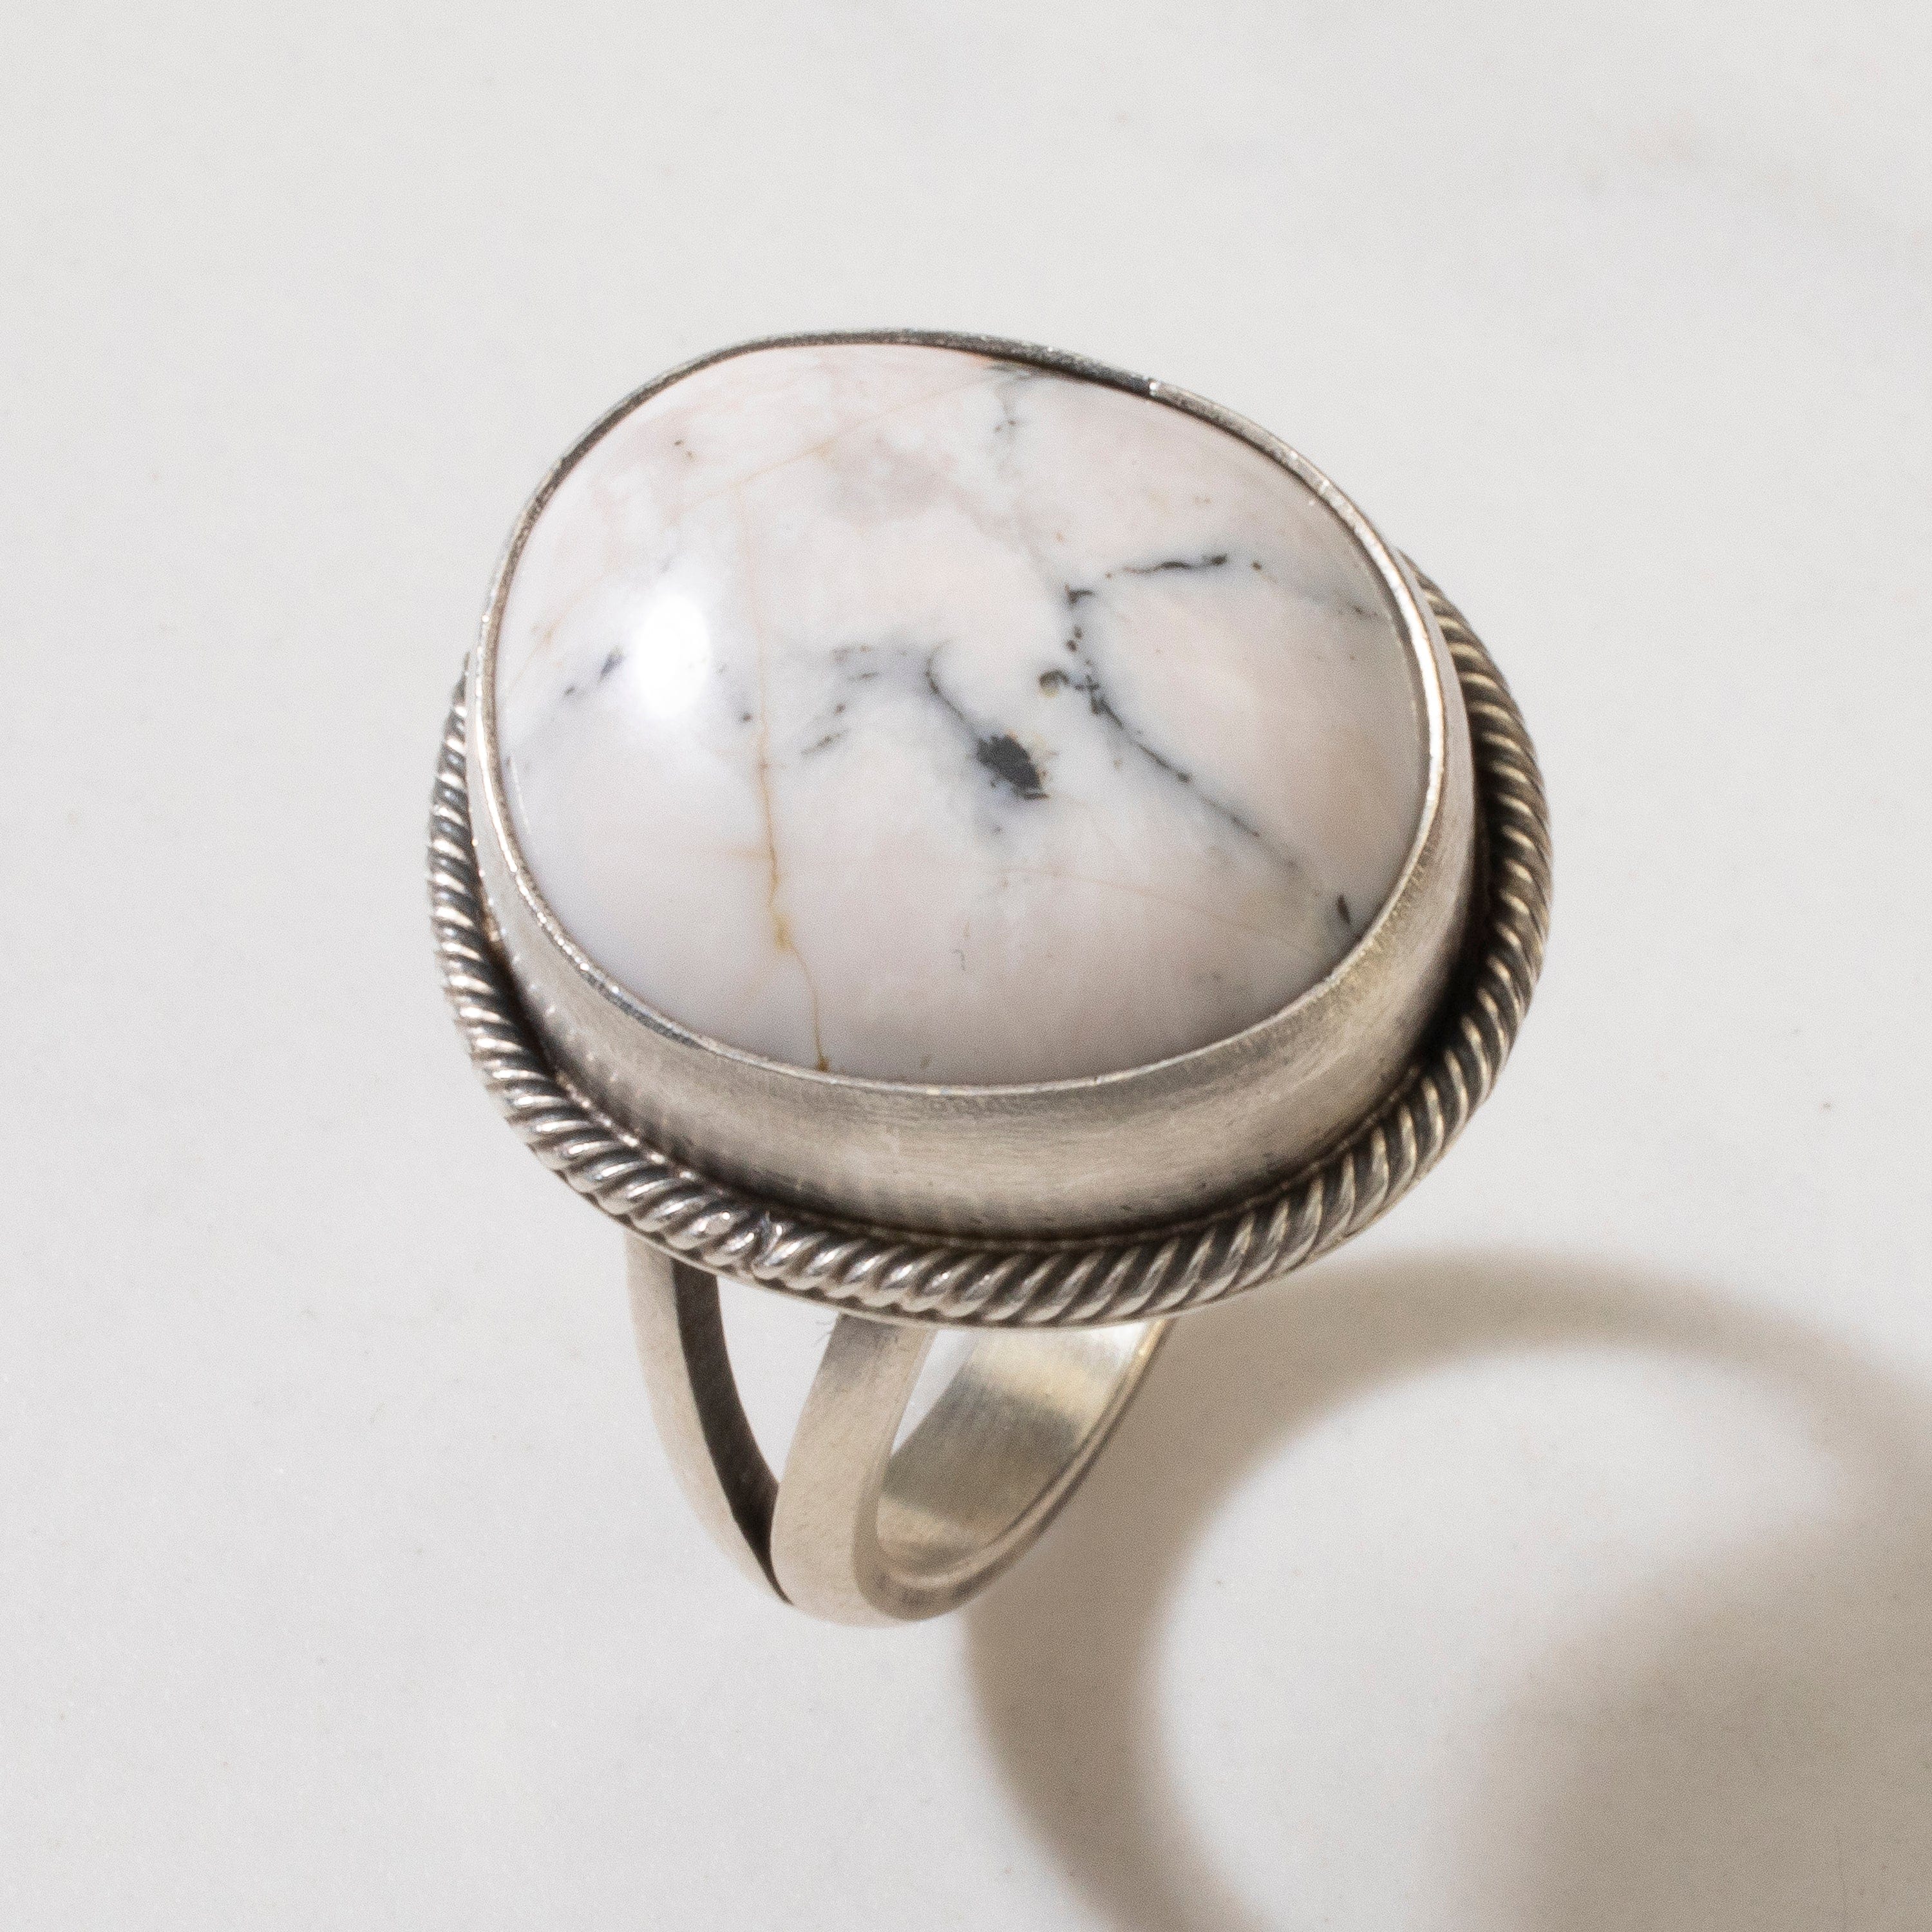 Kalifano Native American Jewelry 6 Scott Skeets White Buffalo Turquoise Round Navajo USA Native American Made 925 Sterling Silver Ring NAR500.077.6